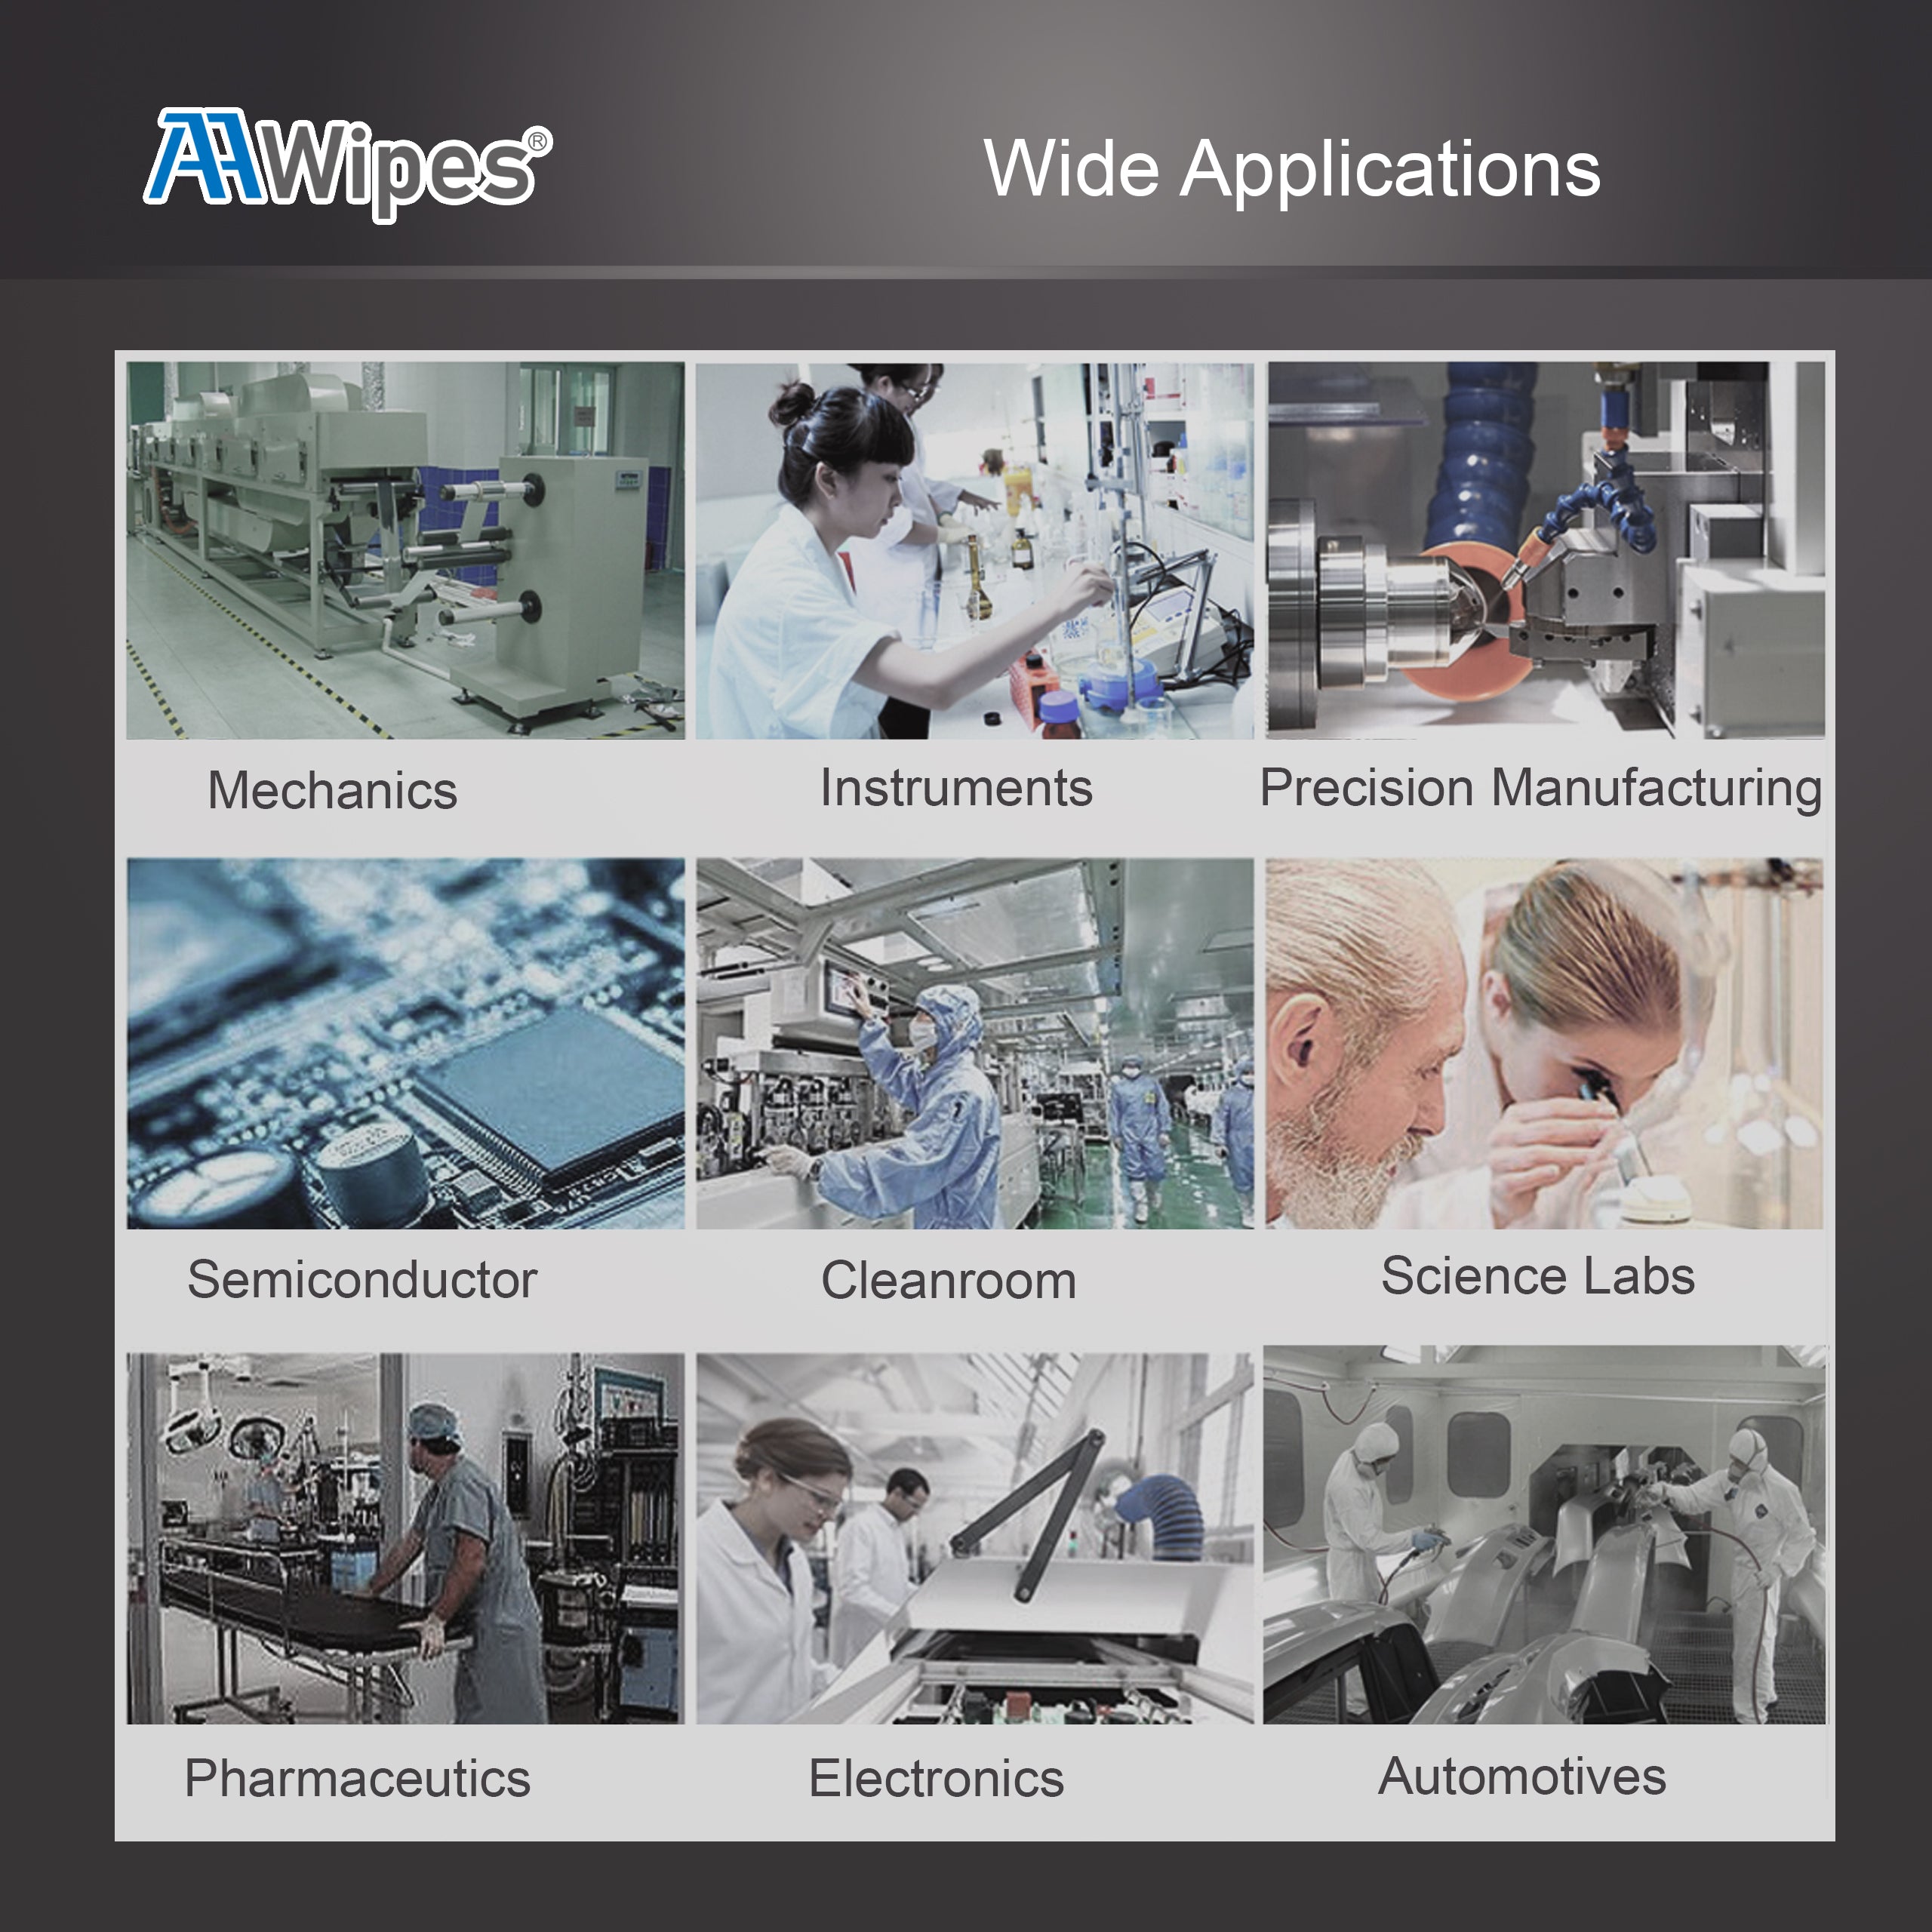 Lab Cleanroom Wipers Nonwoven Wipes 4"x4" Cellulose/Polyester Wiping Cloth for Electronics, Automotive, Printing and Semiconductor Industries. 16,800 wipes/box in 28 bags (No. NW06804).